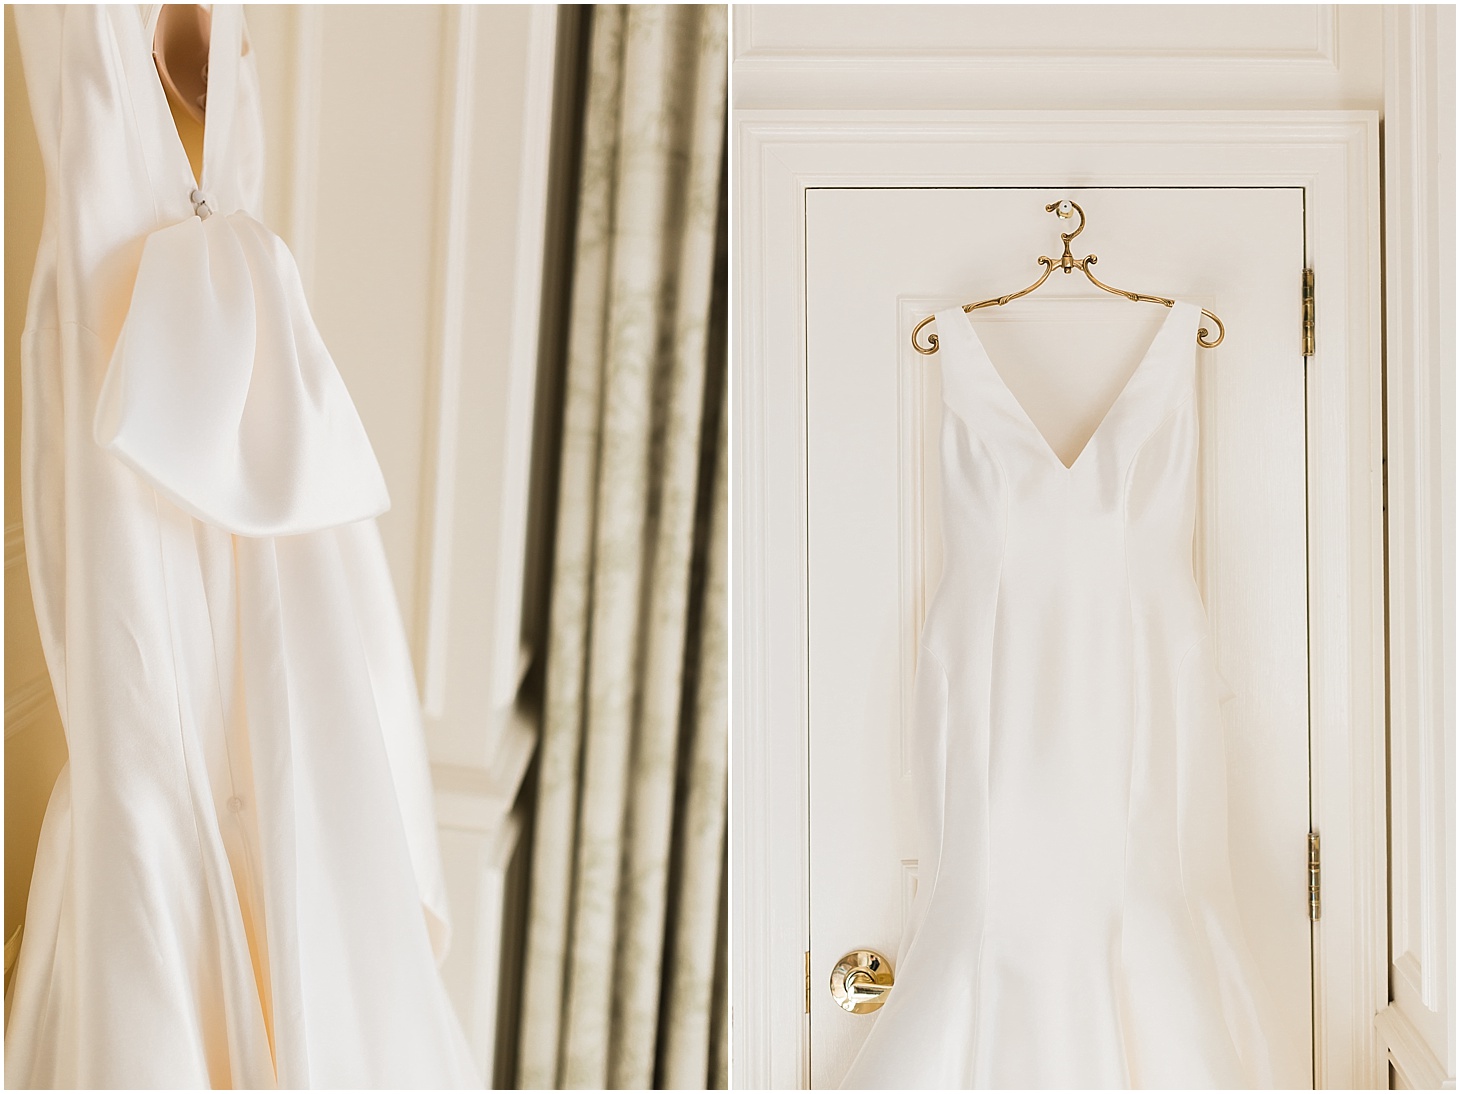 Sareh Nouri Wedding Gown, Champagne-toned Multicultural Wedding at the Hay-Adams Hotel, Ceremony at National City Christian Church, Sarah Bradshaw Photography, DC Wedding Photographer